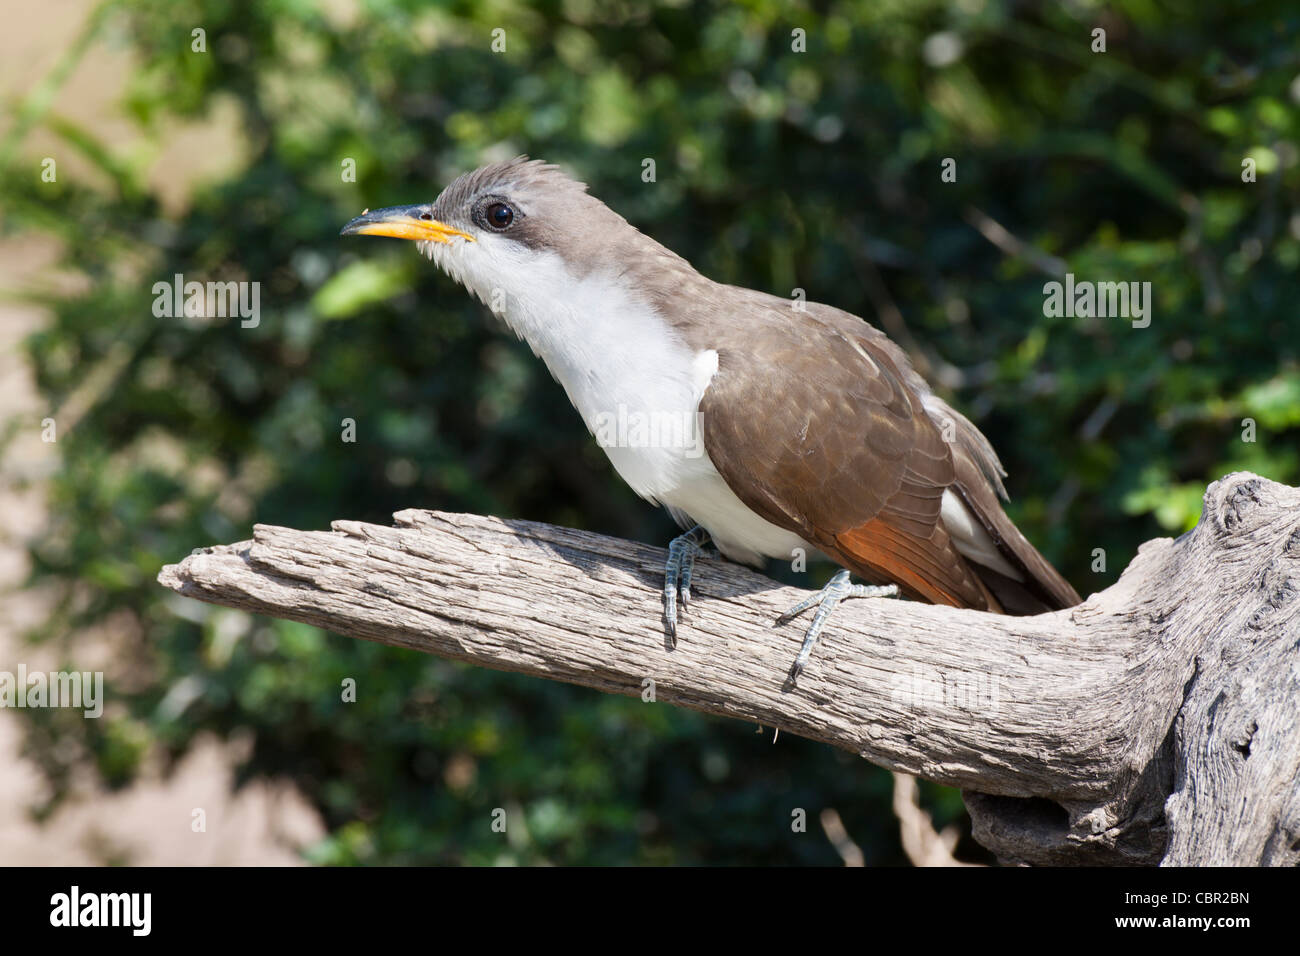 Yellow-billed Cuckoo, Coccyzus americanus, sometimes called the 'rain crow' on a ranch in South Texas. Stock Photo